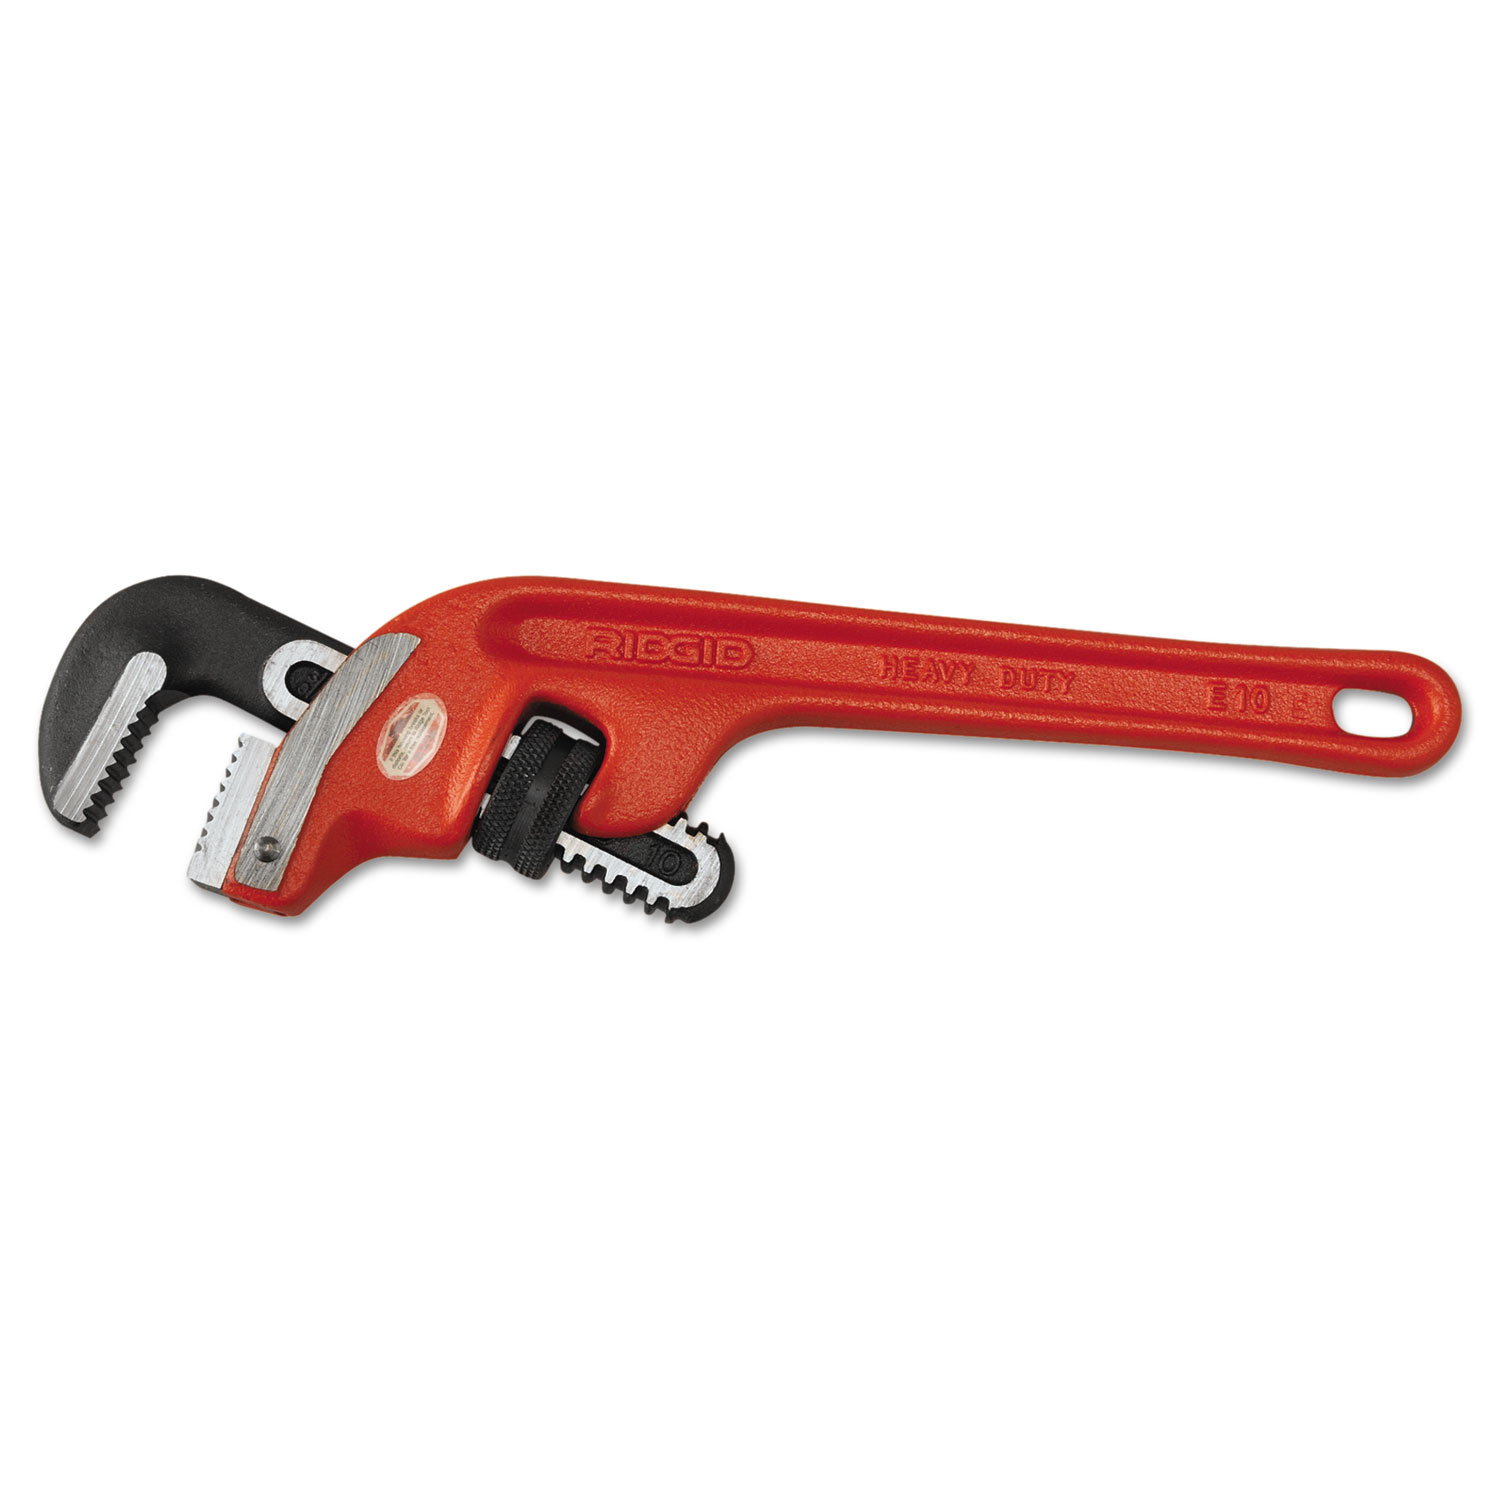 RIDGID End Pipe Wrench, 10 Long, 1 1/2 Opening